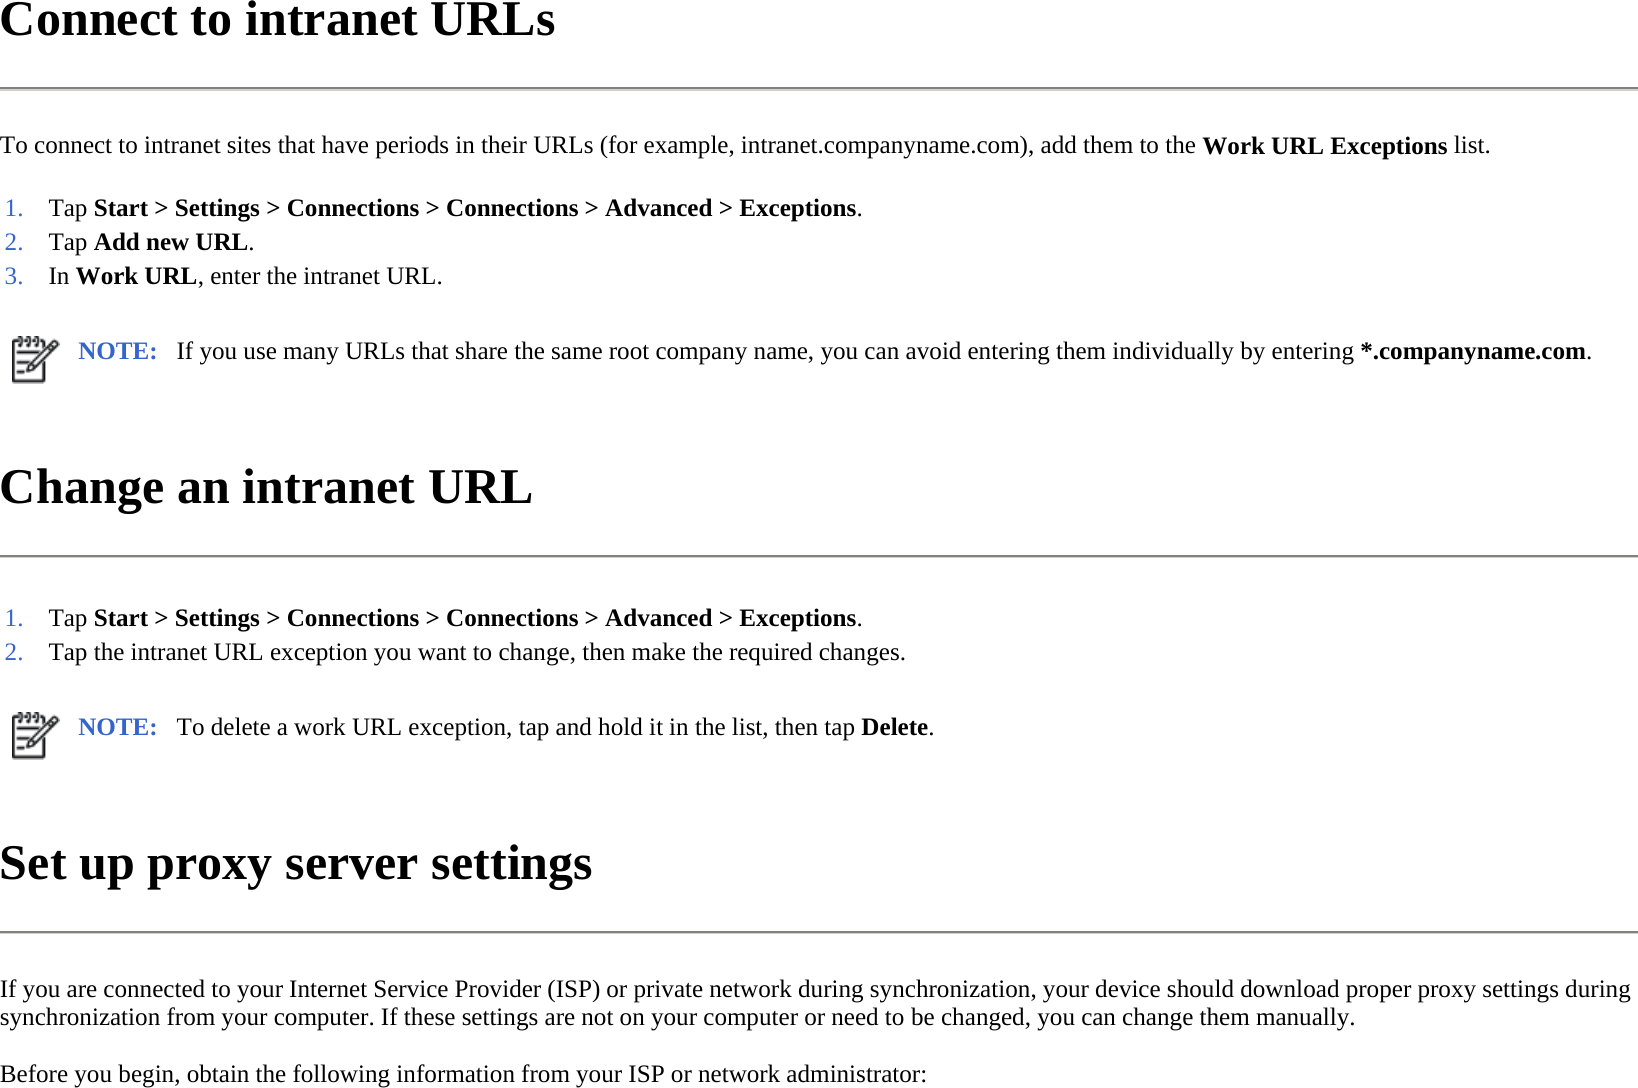 Connect to intranet URLs  To connect to intranet sites that have periods in their URLs (for example, intranet.companyname.com), add them to the Work URL Exceptions list.  Change an intranet URL  Set up proxy server settings  If you are connected to your Internet Service Provider (ISP) or private network during synchronization, your device should download proper proxy settings during synchronization from your computer. If these settings are not on your computer or need to be changed, you can change them manually.  Before you begin, obtain the following information from your ISP or network administrator:  1. Tap Start &gt; Settings &gt; Connections &gt; Connections &gt;Advanced &gt;Exceptions.2. Tap Add new URL.3. In Work URL, enter the intranet URL. NOTE: If you use many URLs that share the same root company name, you can avoid entering them individually by entering *.companyname.com. 1. Tap Start &gt; Settings &gt; Connections &gt; Connections &gt;Advanced &gt;Exceptions.2. Tap the intranet URL exception you want to change, then make the required changes.NOTE: To delete a work URL exception, tap and hold it in the list, then tap Delete. 